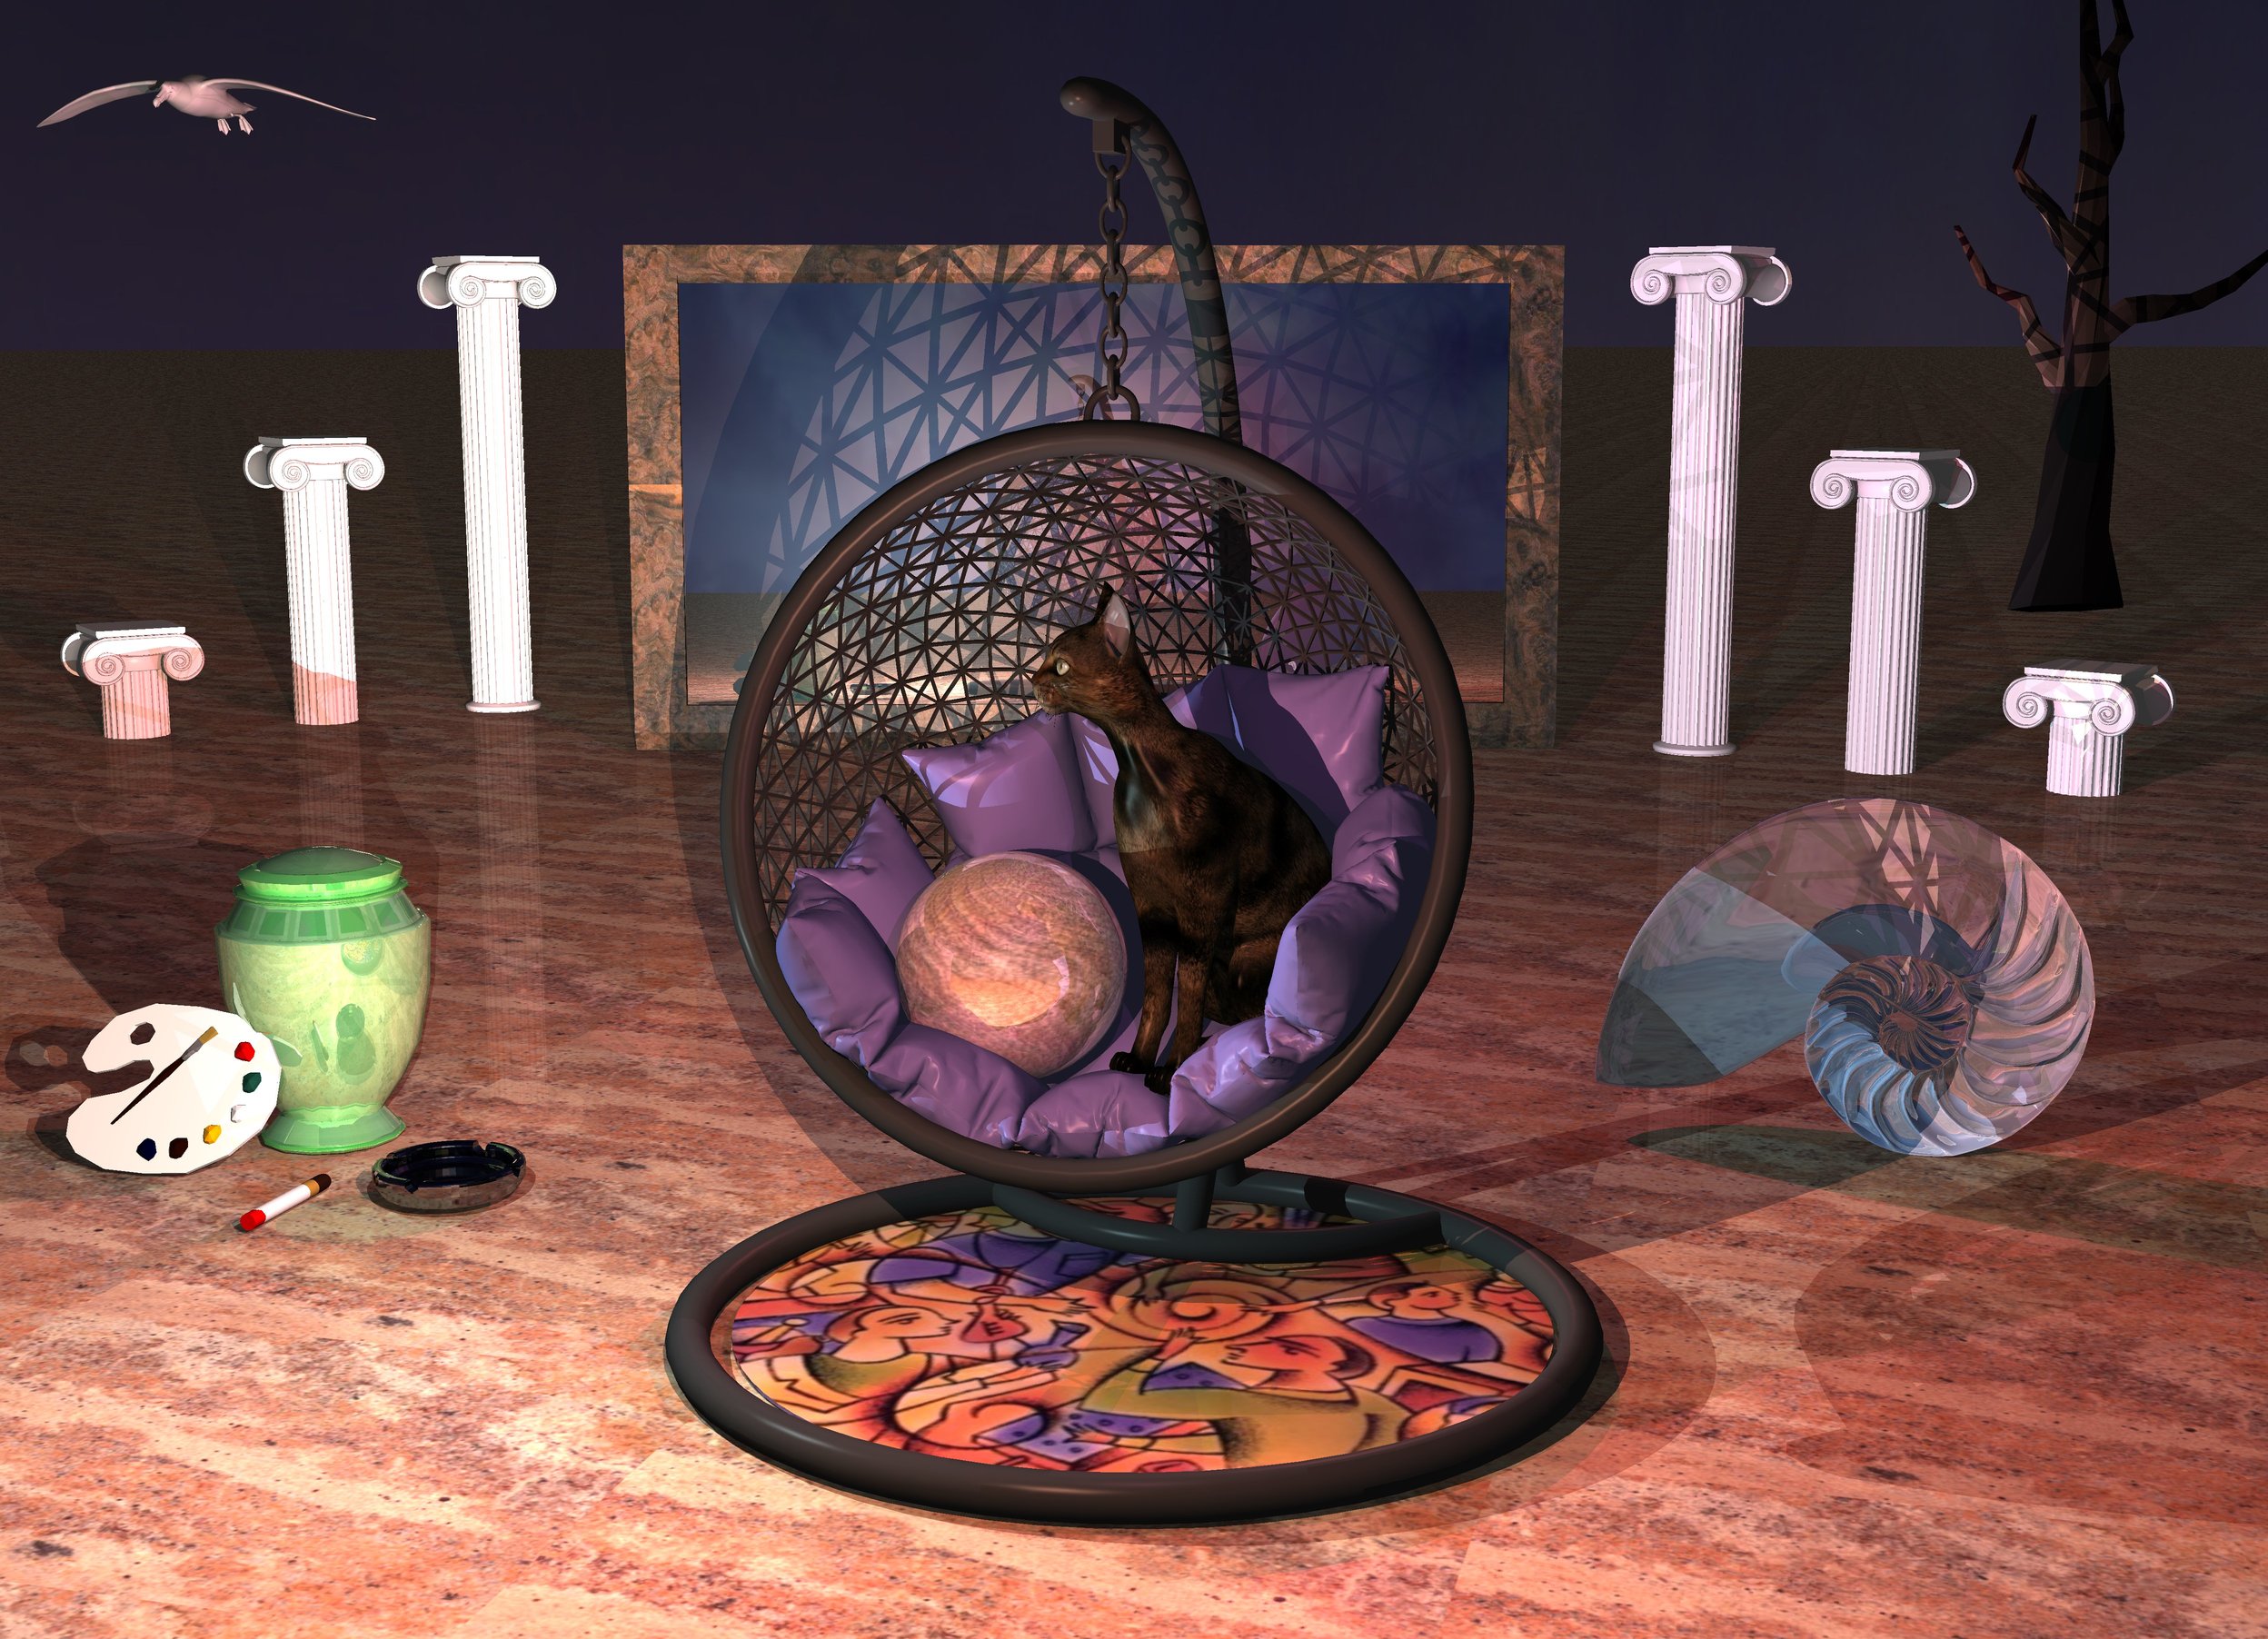 Input text: a swing. swing's cushion is wisteria violet. 2.5 foot tall cat is 2 foot in swing's cushion and -3 foot to right. cat faces southwest. 1.2 foot tall shiny [texture] sphere is -0.55 foot left of cat. sphere is 2.15 foot in swing's cushion. small first blug is 15 foot behind swing and 12 foot to left. blug is 6 foot in ground. tiny cube is 1 foot in front of blug and 1.5 foot to right. blug faces cube. small blurg is 17 foot behind swing and -2 foot to right. blurg is 6 foot in ground. tiny second cube is 1 foot in front of blurg and -2 foot to left. blurg faces cube. 4.5 foot wide circle is -5 foot in front of swing. circle is 5 foot wide 25% reflective [jij]. ground is 5% reflective 10 foot wide [texture]. sun is black. camera light is black. dawn rose light is 2 foot in front of swing and 3 foot above ground. light faces swing. lagoon turquoise light is 2 foot left of cat and -0.5 foot in front of cat. light faces swing. bordeaux wine mauve light is 3 foot behind swing and 3 foot above ground. light faces swing. 12 foot wide and 6.5 foot tall silver picture frame is 2.5 foot right of blug and 0.1 inch in ground. picture frame leans 5 degrees to front. picture frame faces swing. picture frame's frame is 0% reflective [texture]. dim hot pink light is in front of cat. light is 1 foot in cat. petrel is -1.5 foot in blug and -2 foot to front. pale petrel is 3.5 foot to right. petrel faces northeast. petrel leans 40 degrees to back. 13 foot tall flat black tree is 20 foot behind picture frame and 5 foot to right. tree faces back. shiny 2 foot tall lime green urn is -1 foot behind swing and 3 foot to left. 1.5 foot wide paint palette is -2 inch in front of urn and -10 inch to left. paint palette faces down. paint palette leans 32 degrees to back. paint palette's board is white. huge shiny baby blue shell is -0.5 foot right of swing and 2 foot behind swing. 1.4 foot wide shiny black compound object is -1 inch in front of urn and -2 inch to right. 